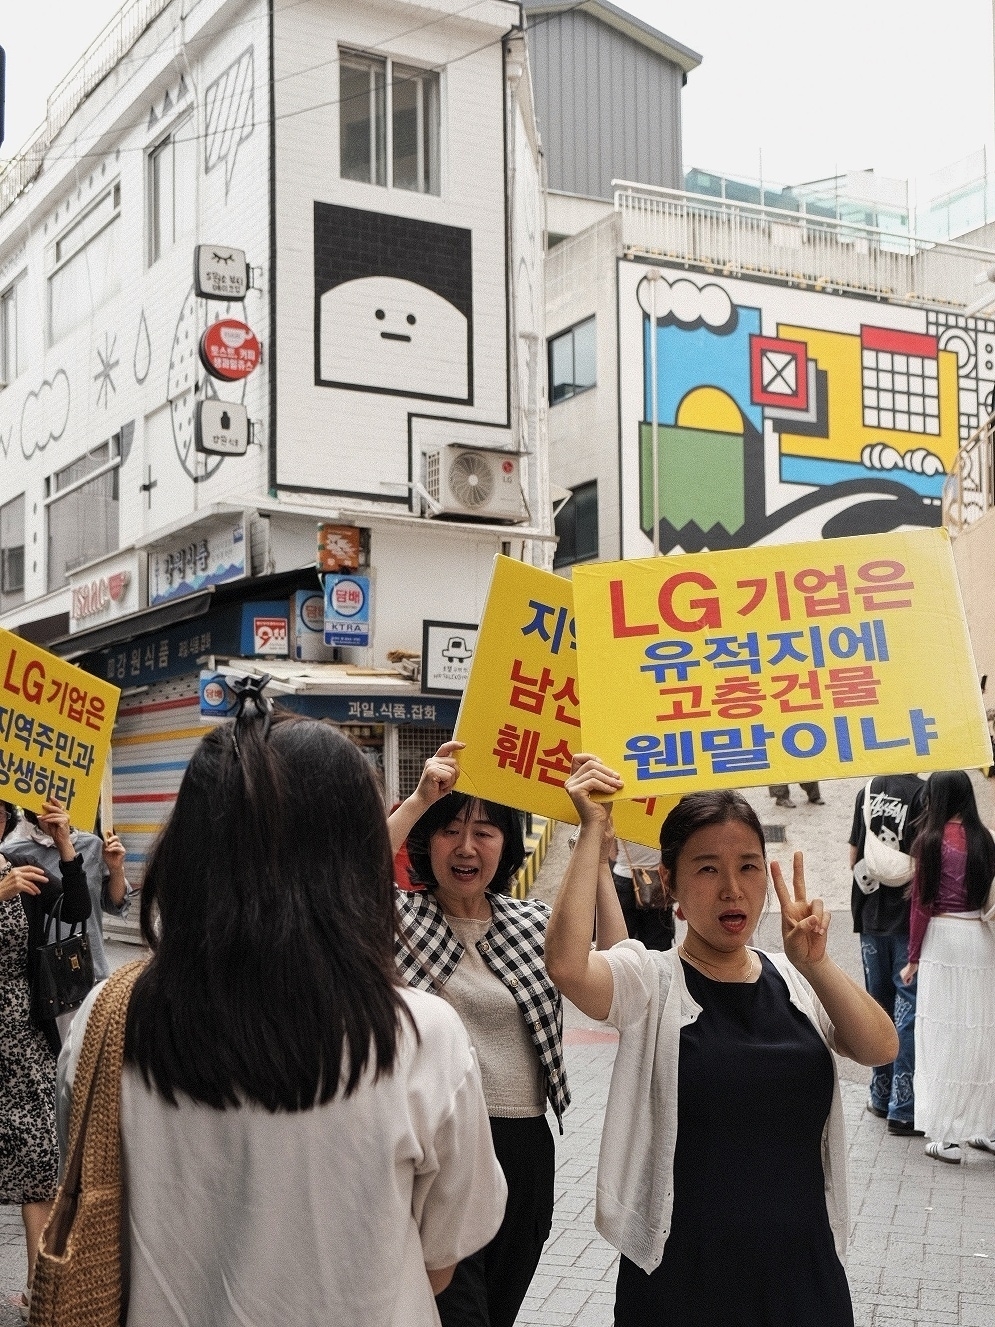 Protesters holding signs against LG. Red and blue Korean script on yellow signs, local buildings and hills in the background 